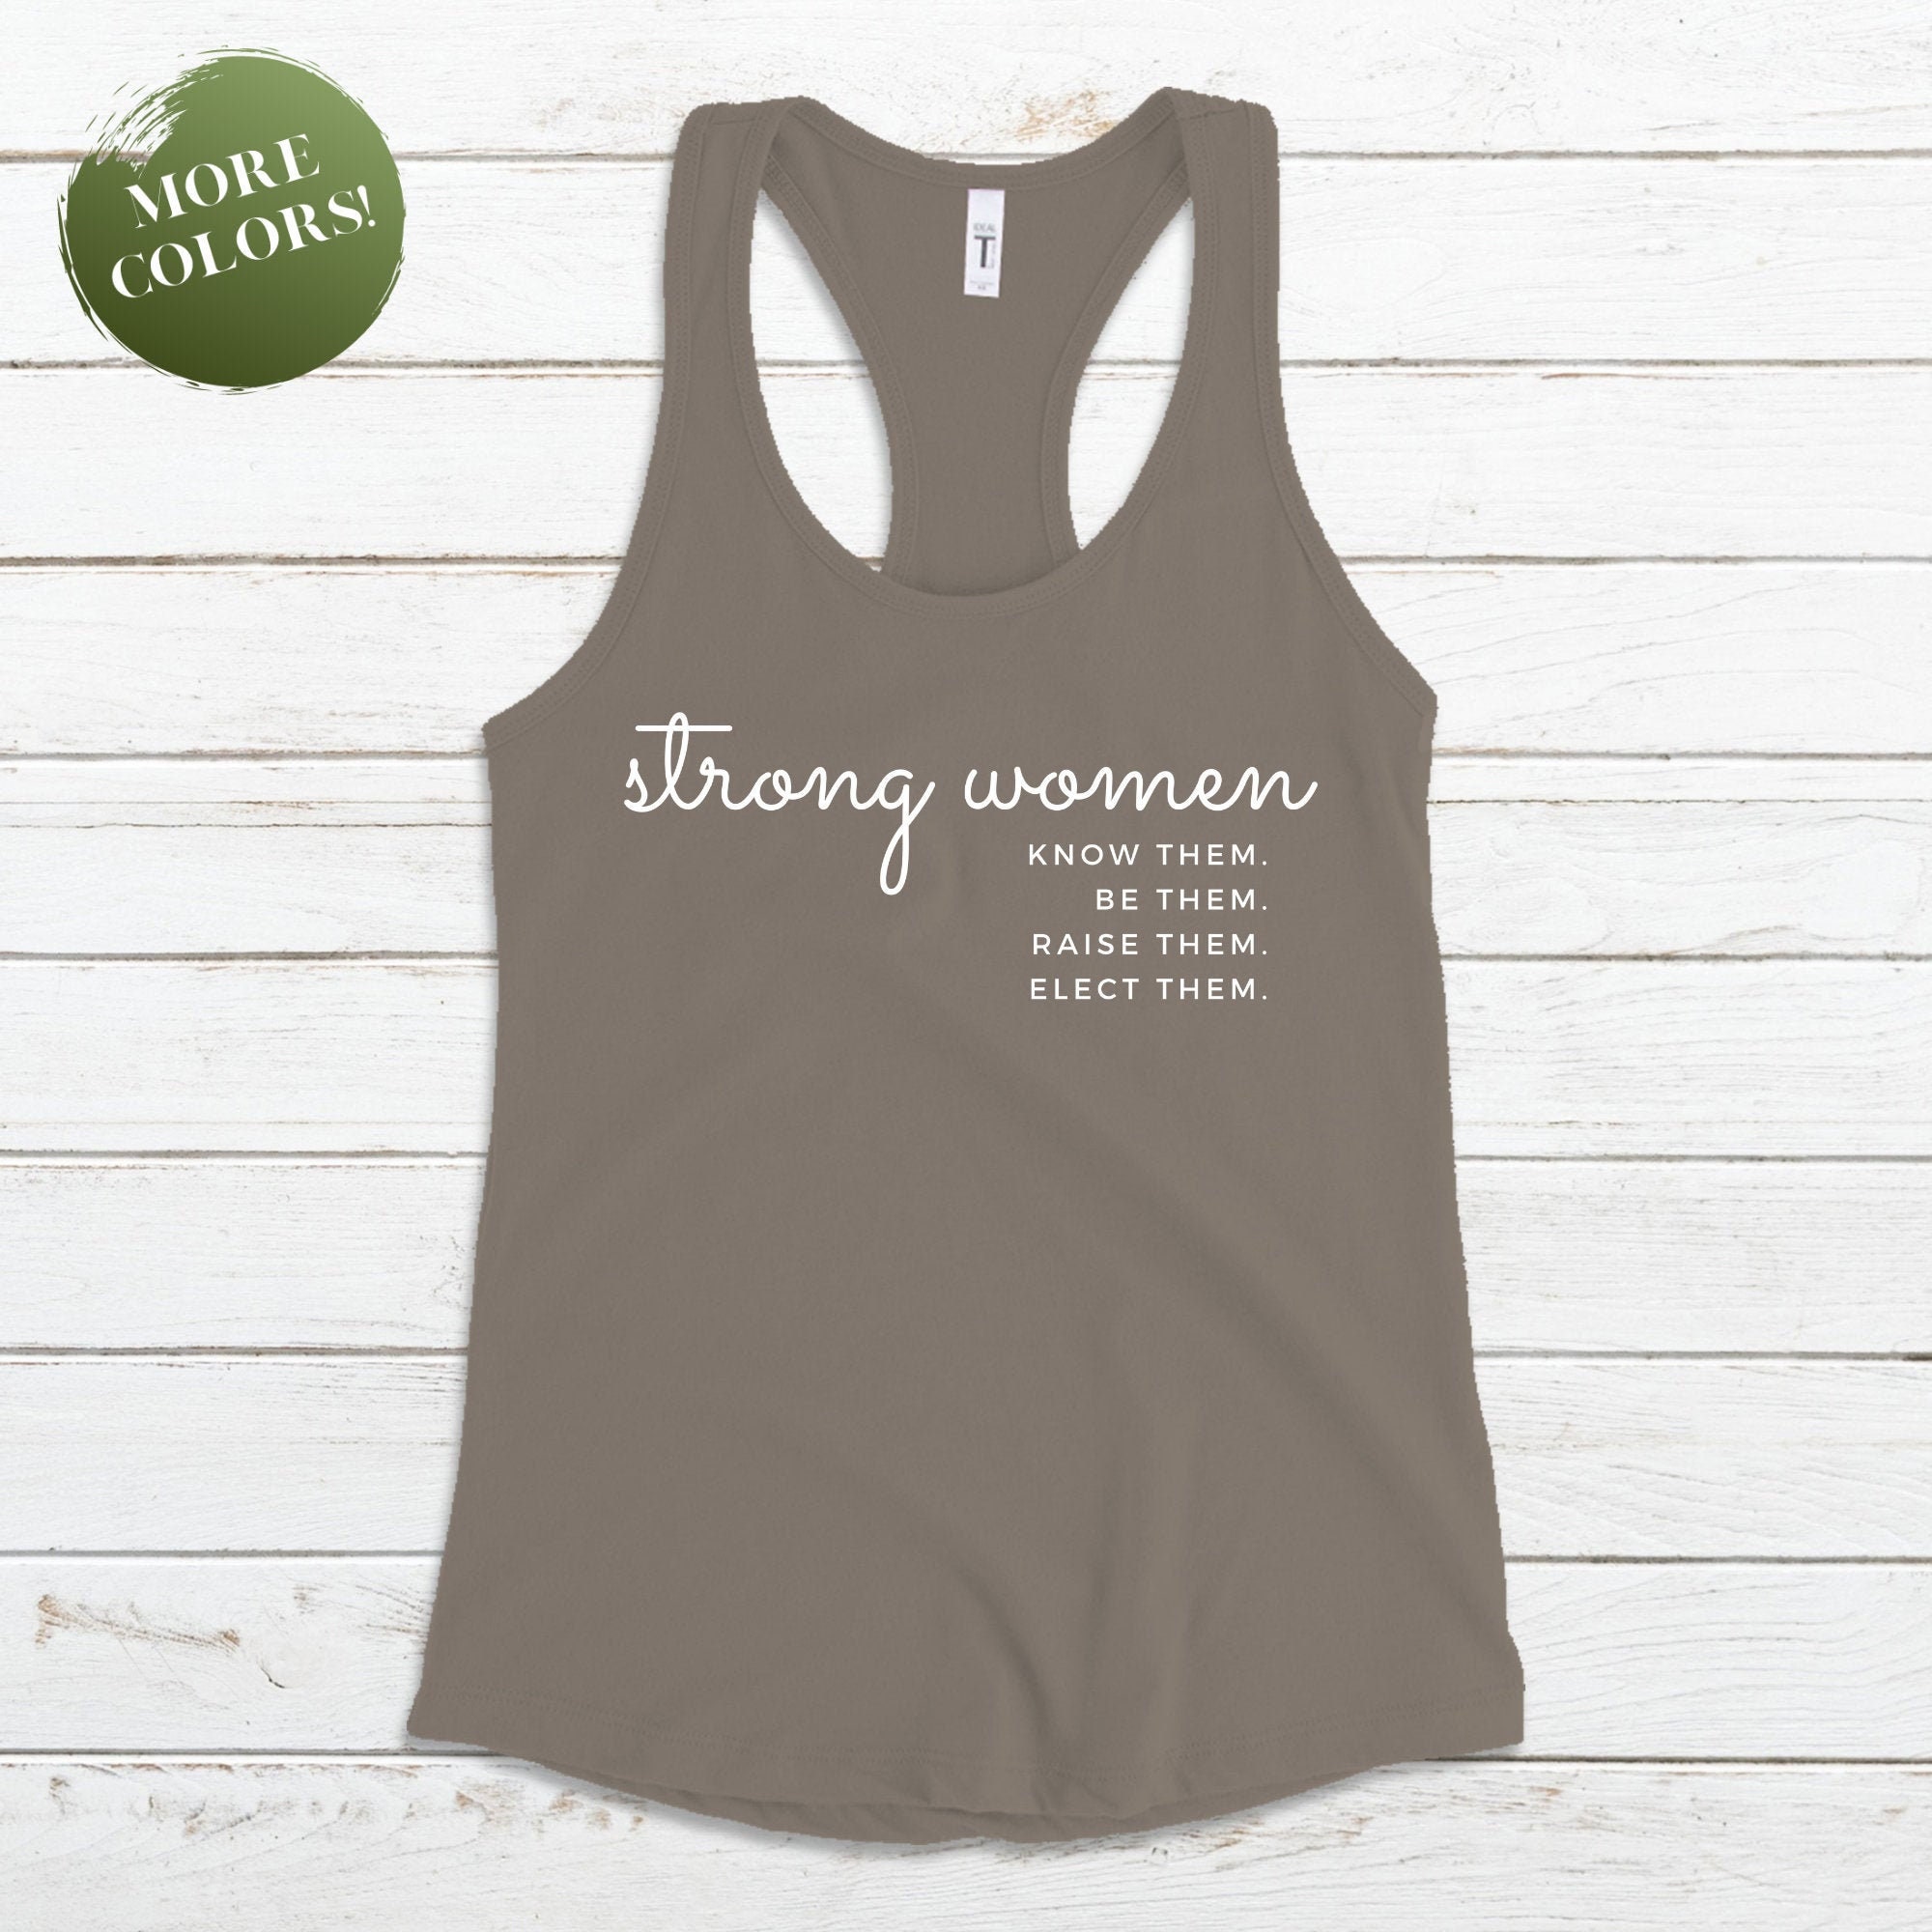 Strong Women Tank Top, Gifts for Her, Women's March, Plus Size Fitness, Workout  Tank, Women's Empowerment, Feminist, Women's Rights 